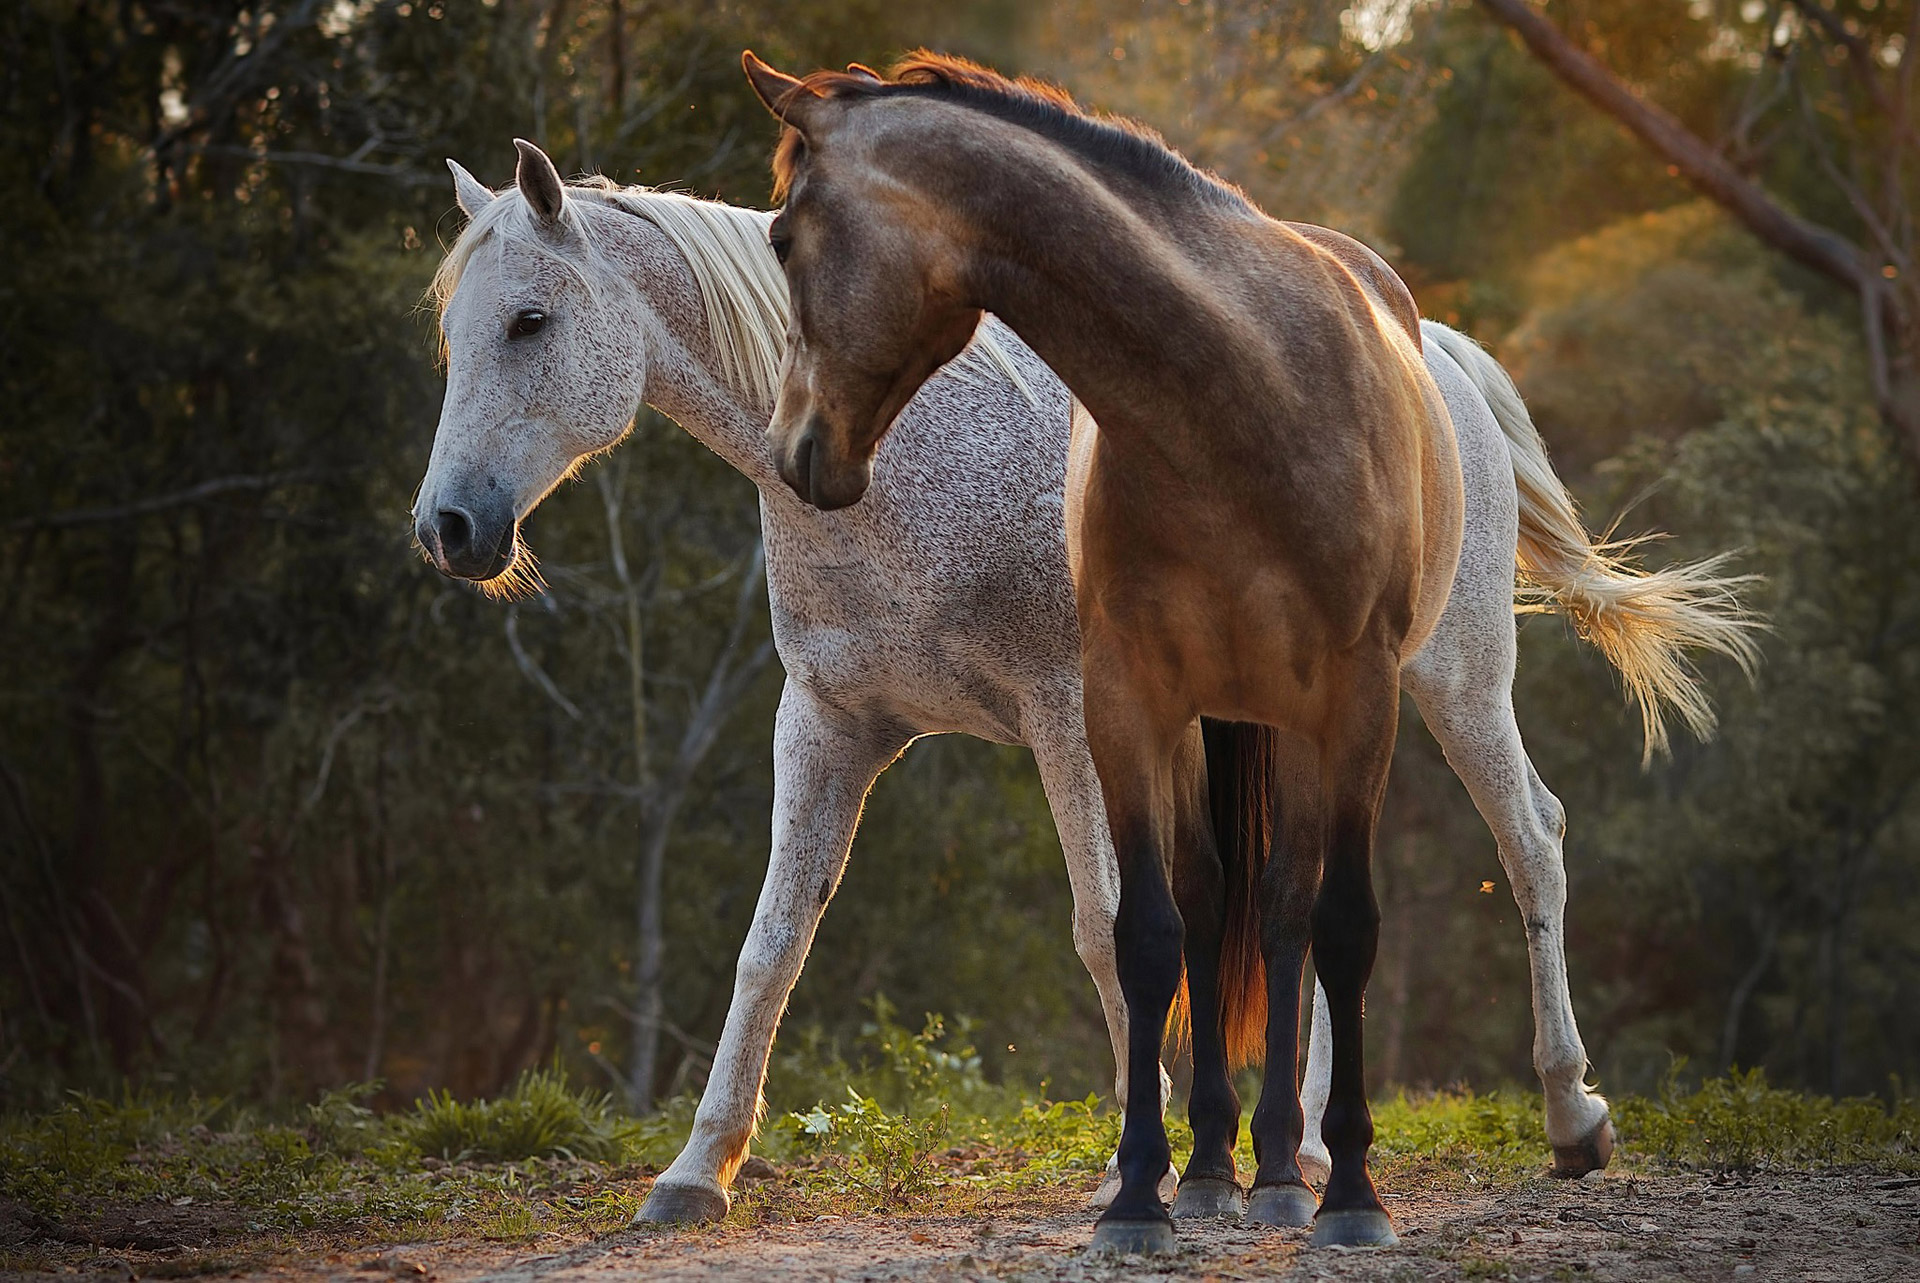 two beautiful horses wallpapers55com   Best Wallpapers for PCs 1920x1283